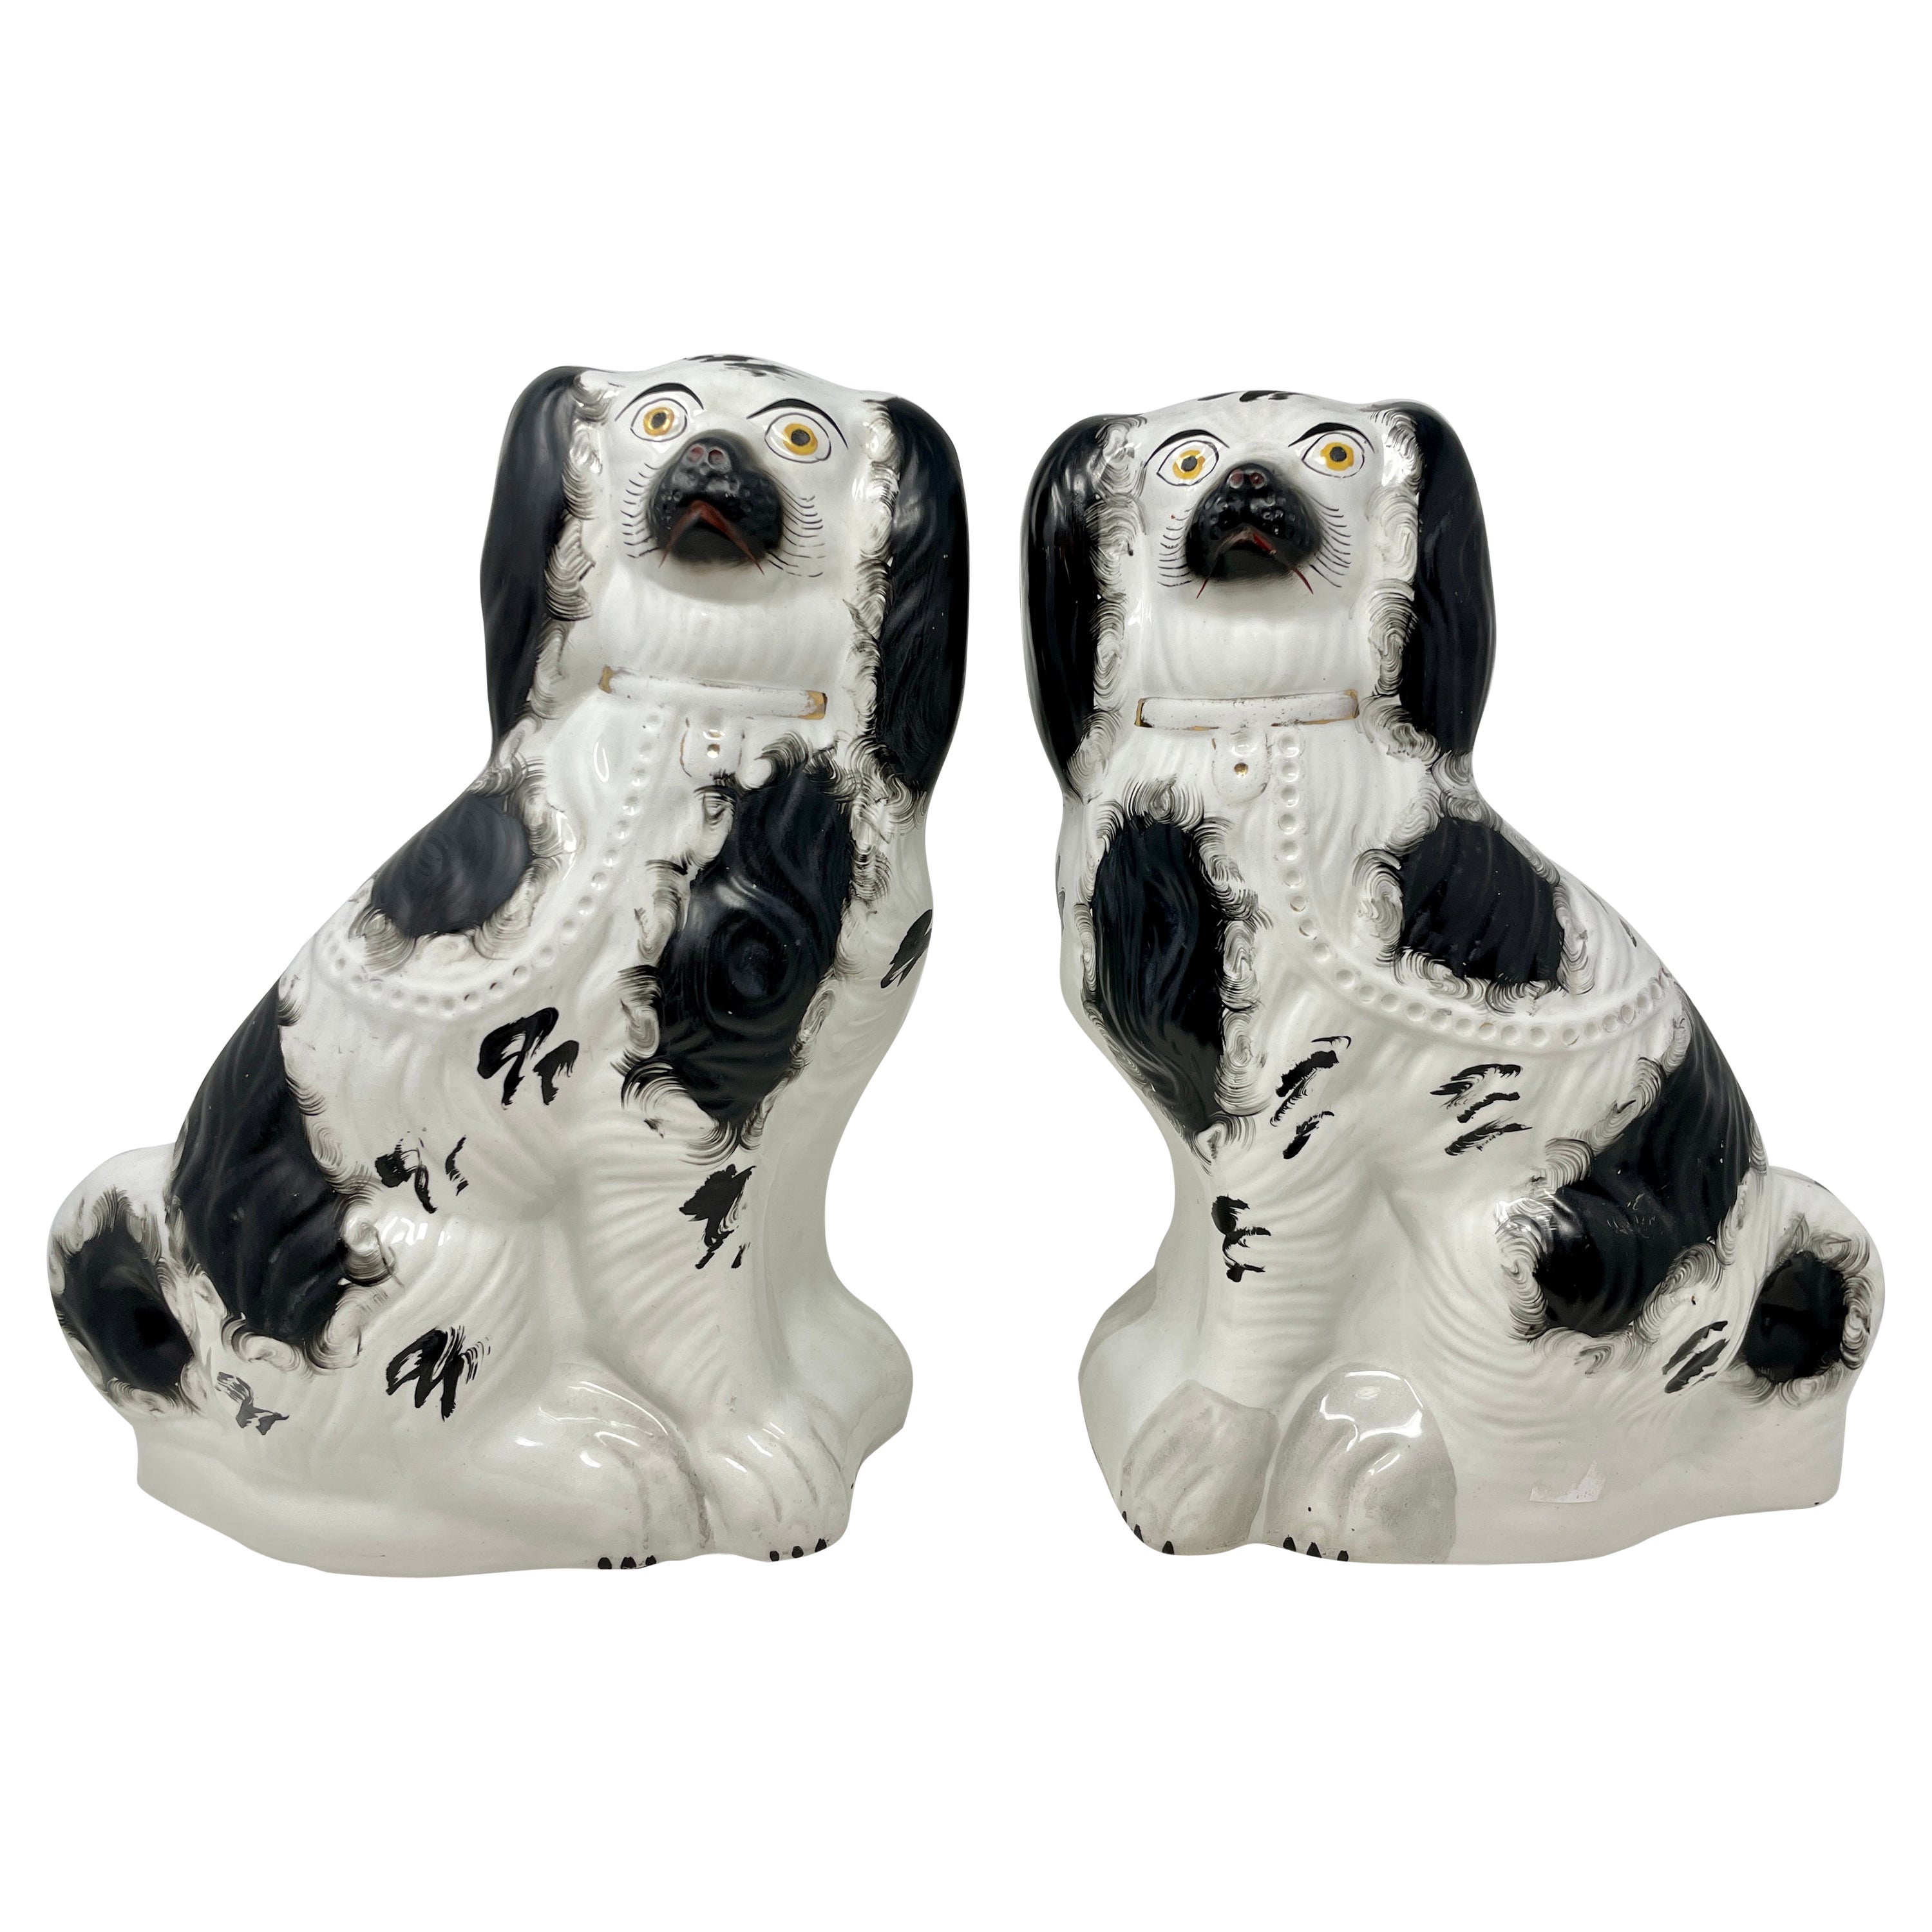 Pair Antique English Staffordshire Porcelain King Charles Spaniel Dogs, Ca 1880s